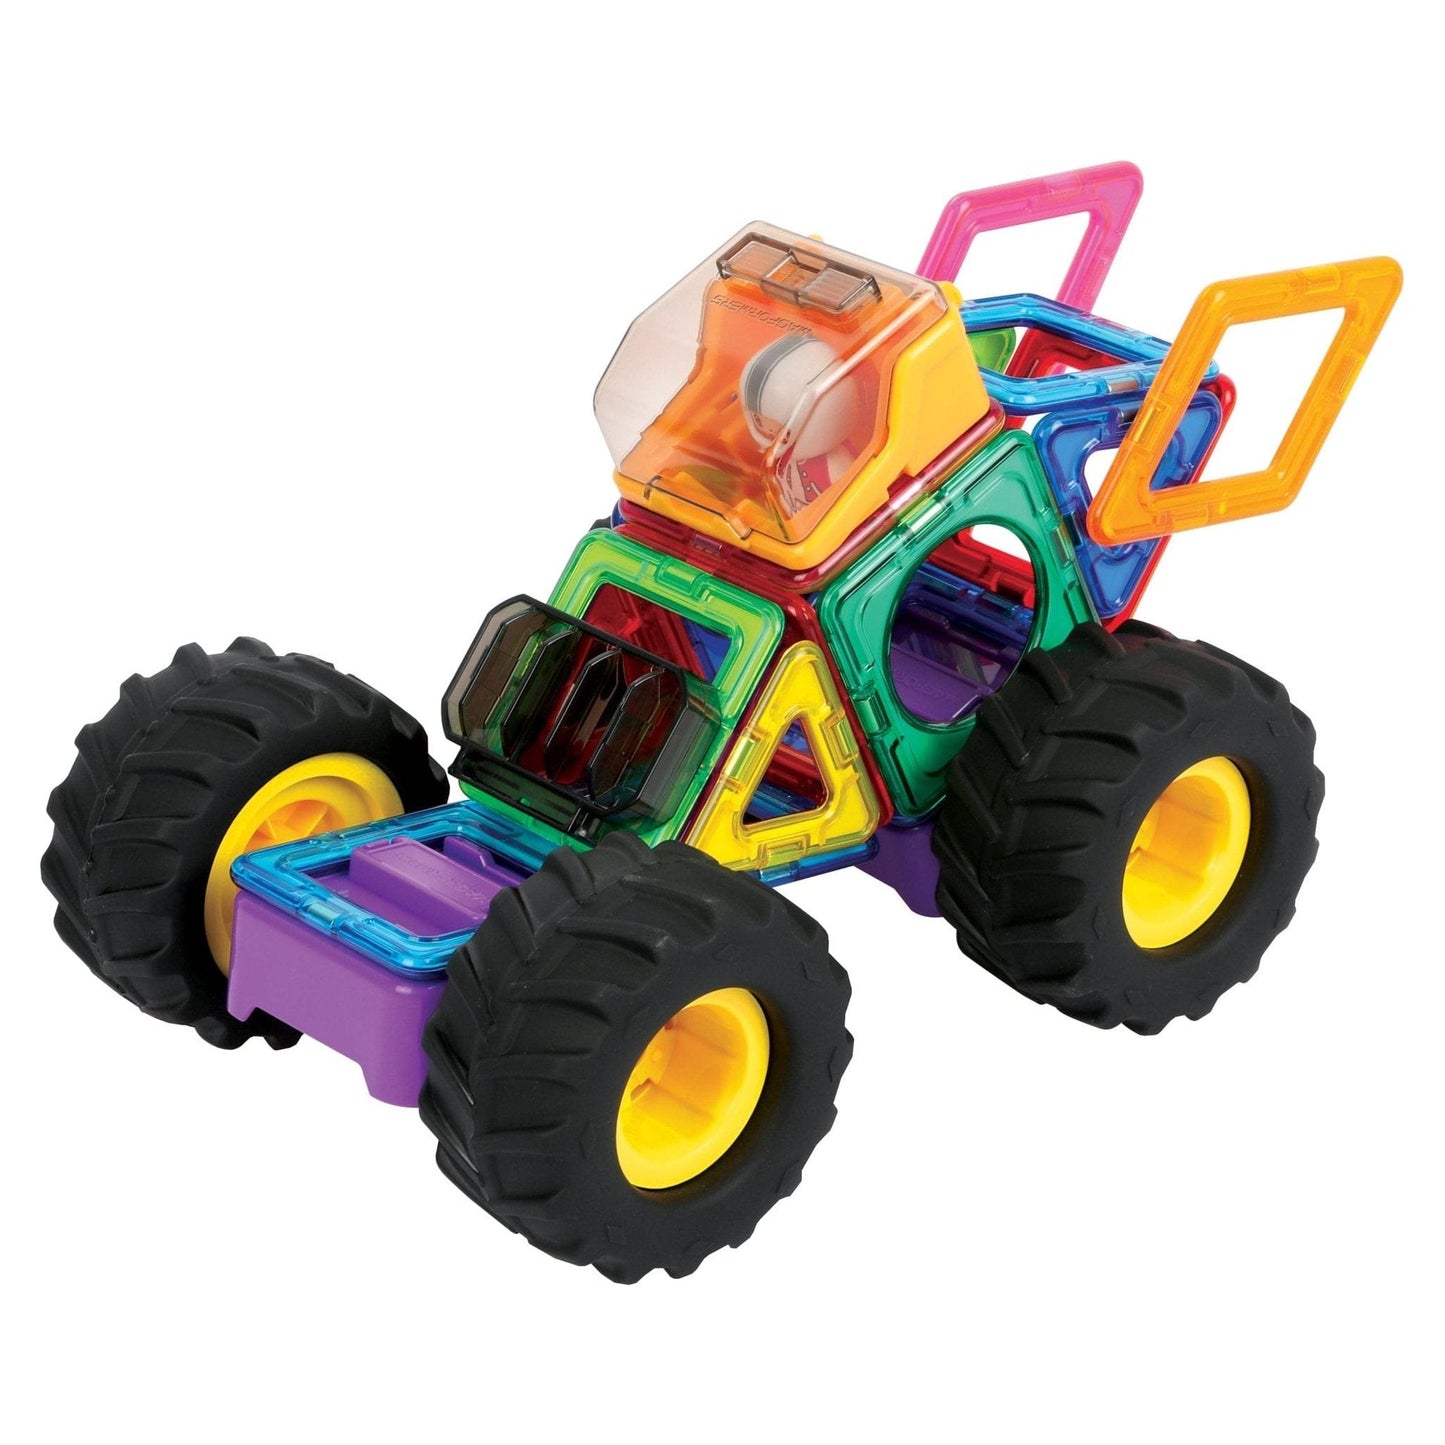 racing car made from Magformers Construction Toy Giant Wheel Set